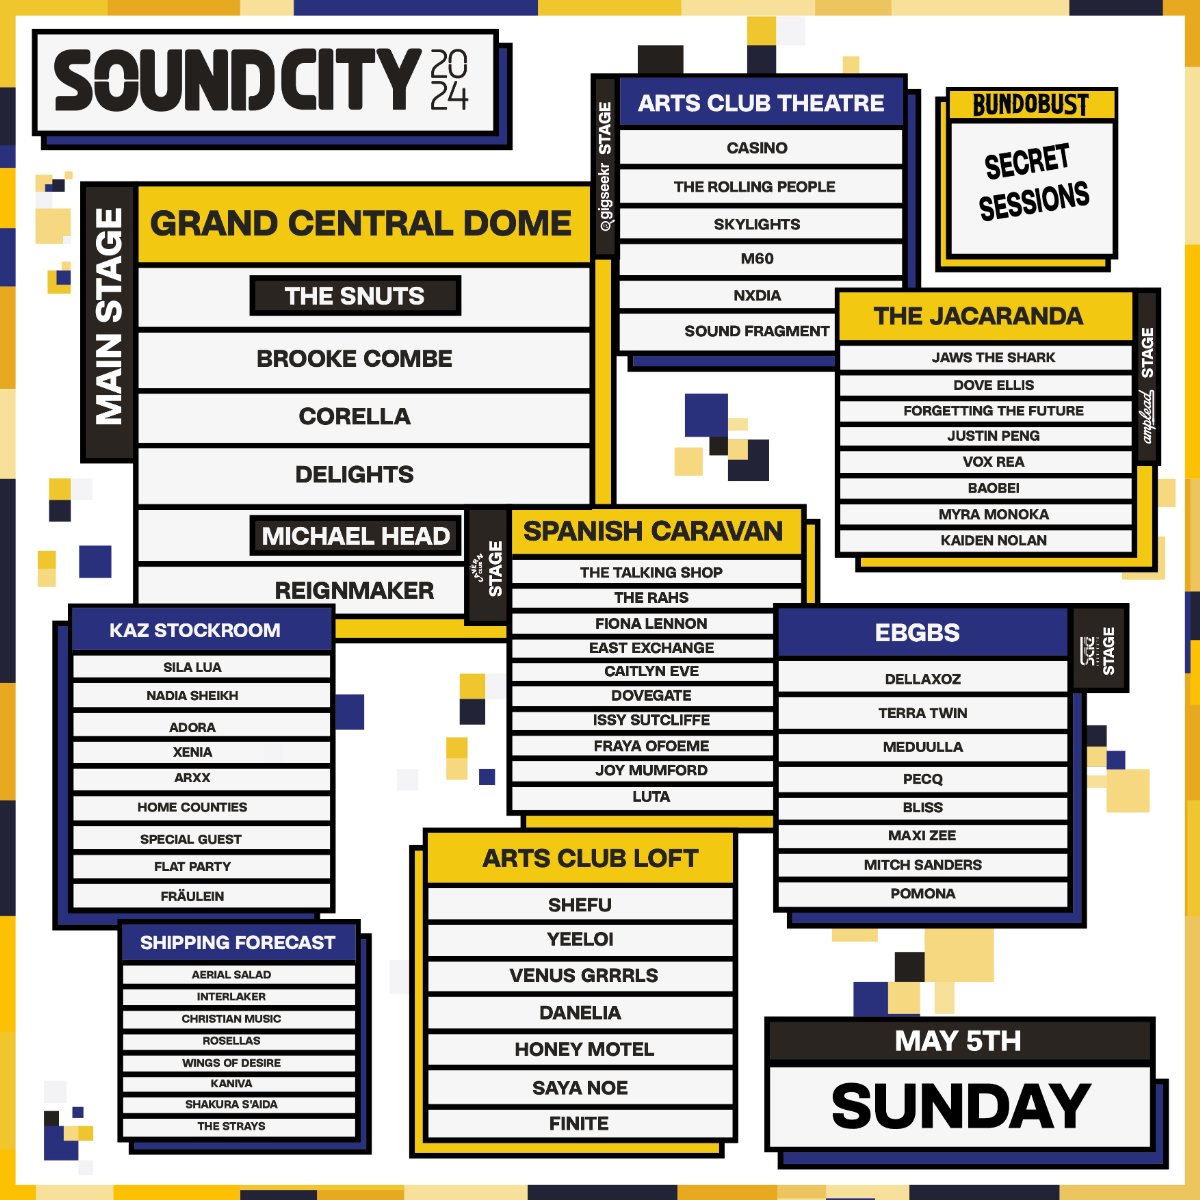 BONG BONG! 📢 Liverpool @SoundCity reveal stage splits for May 4/5 weekender. Saturday includes: @flowerovlove, @decobanduk, @TheKairos1, @Seb_lowe_music and @keysideliv. Sunday features: @michaelheadtreb, @TheSnuts, @brookecombe, @TRPofficial, @Corellamusic and @delightsband_.